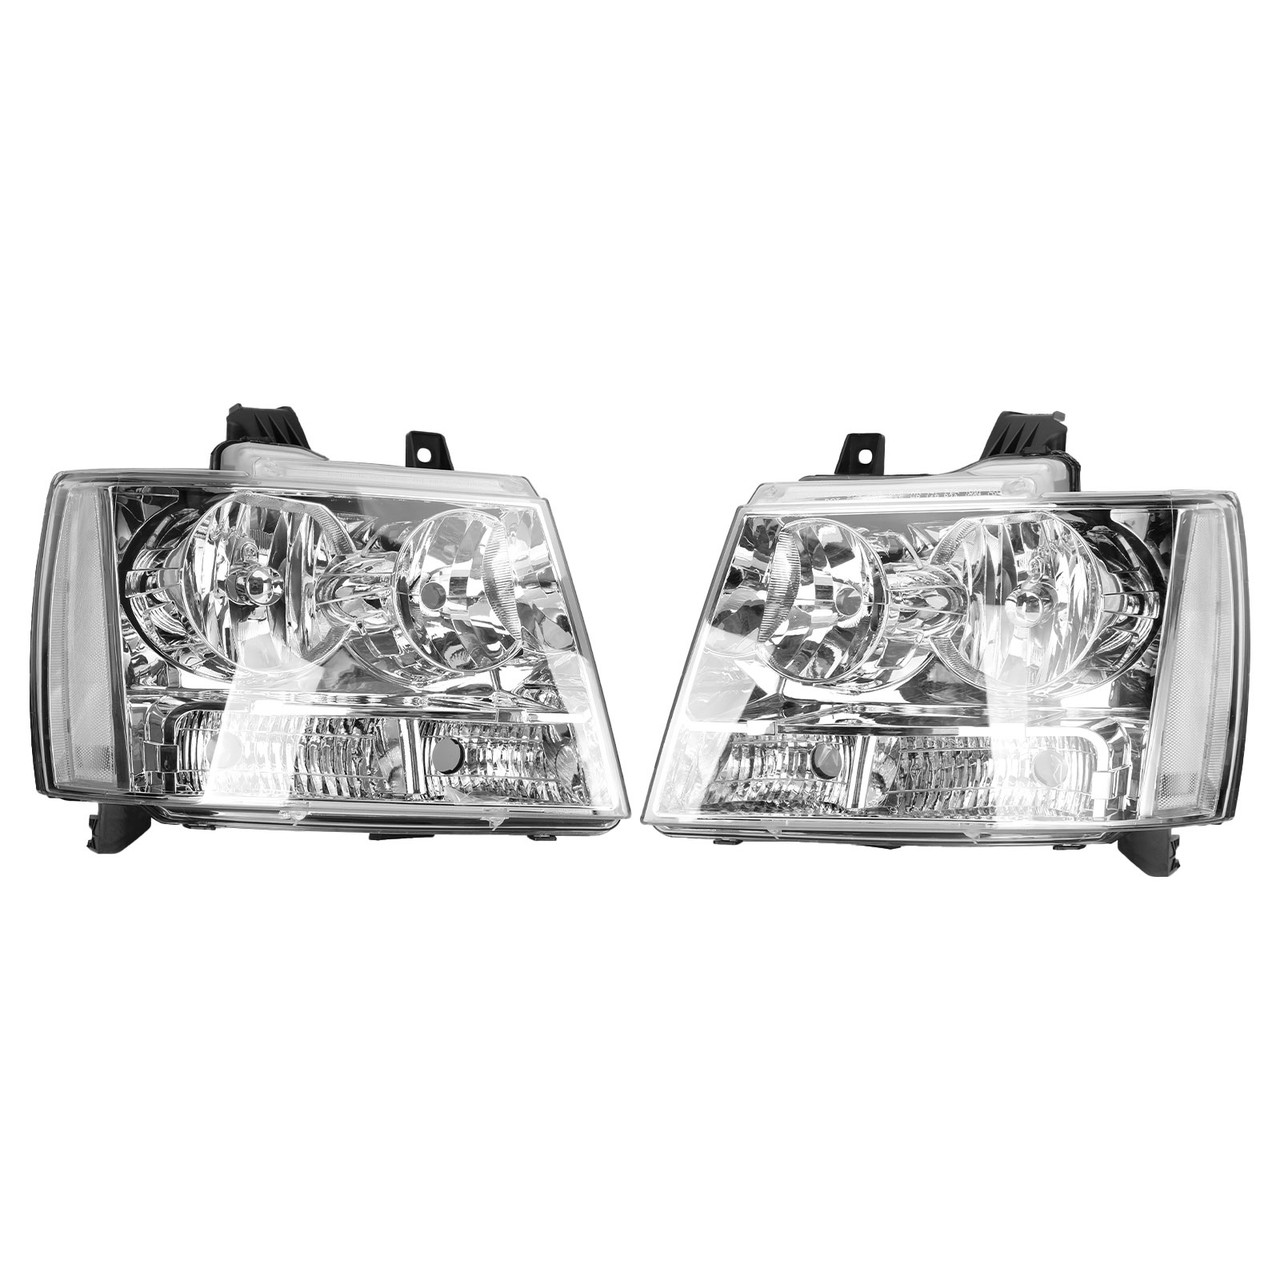 Housing Clear Headlights Assembly Fit for Chevrolet Avalanche Suburban 2500 07-13 Tahoe LT Sport Utility 07-14